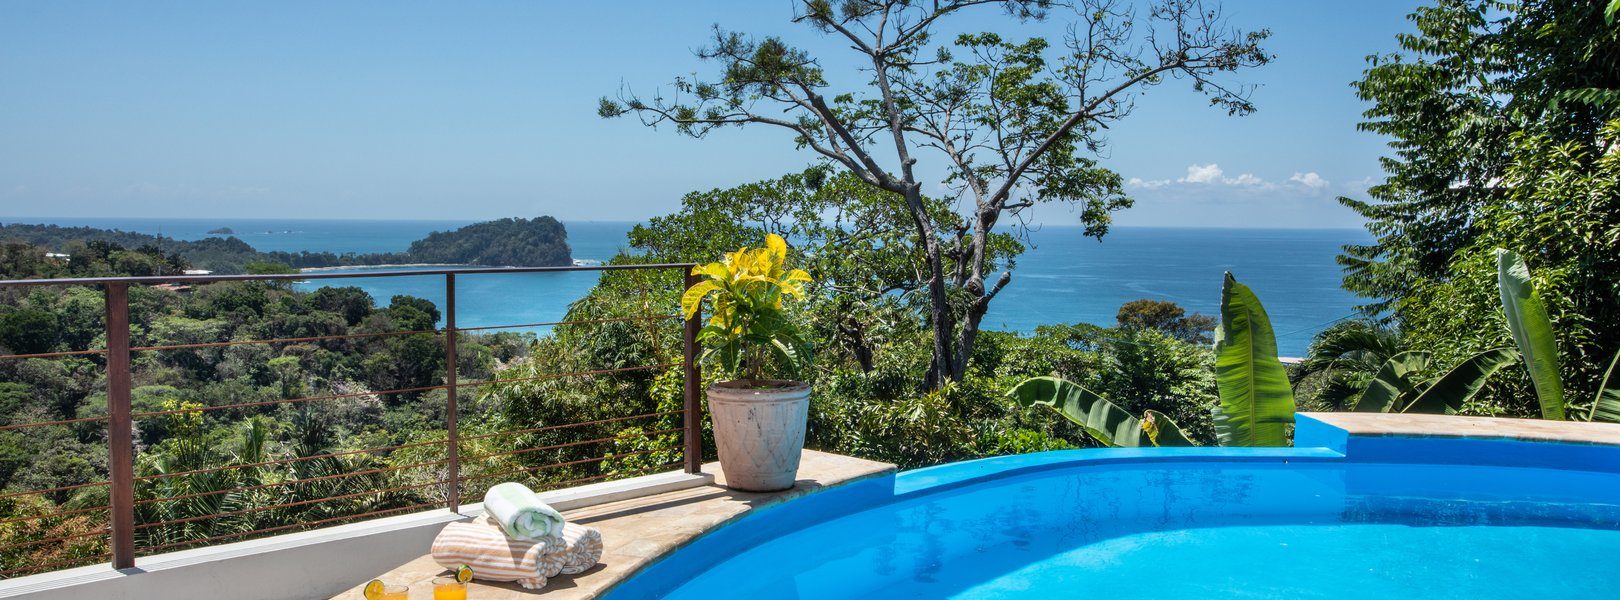 Spend your days relaxing in this refreshing pool with a breathtaking ocean view.